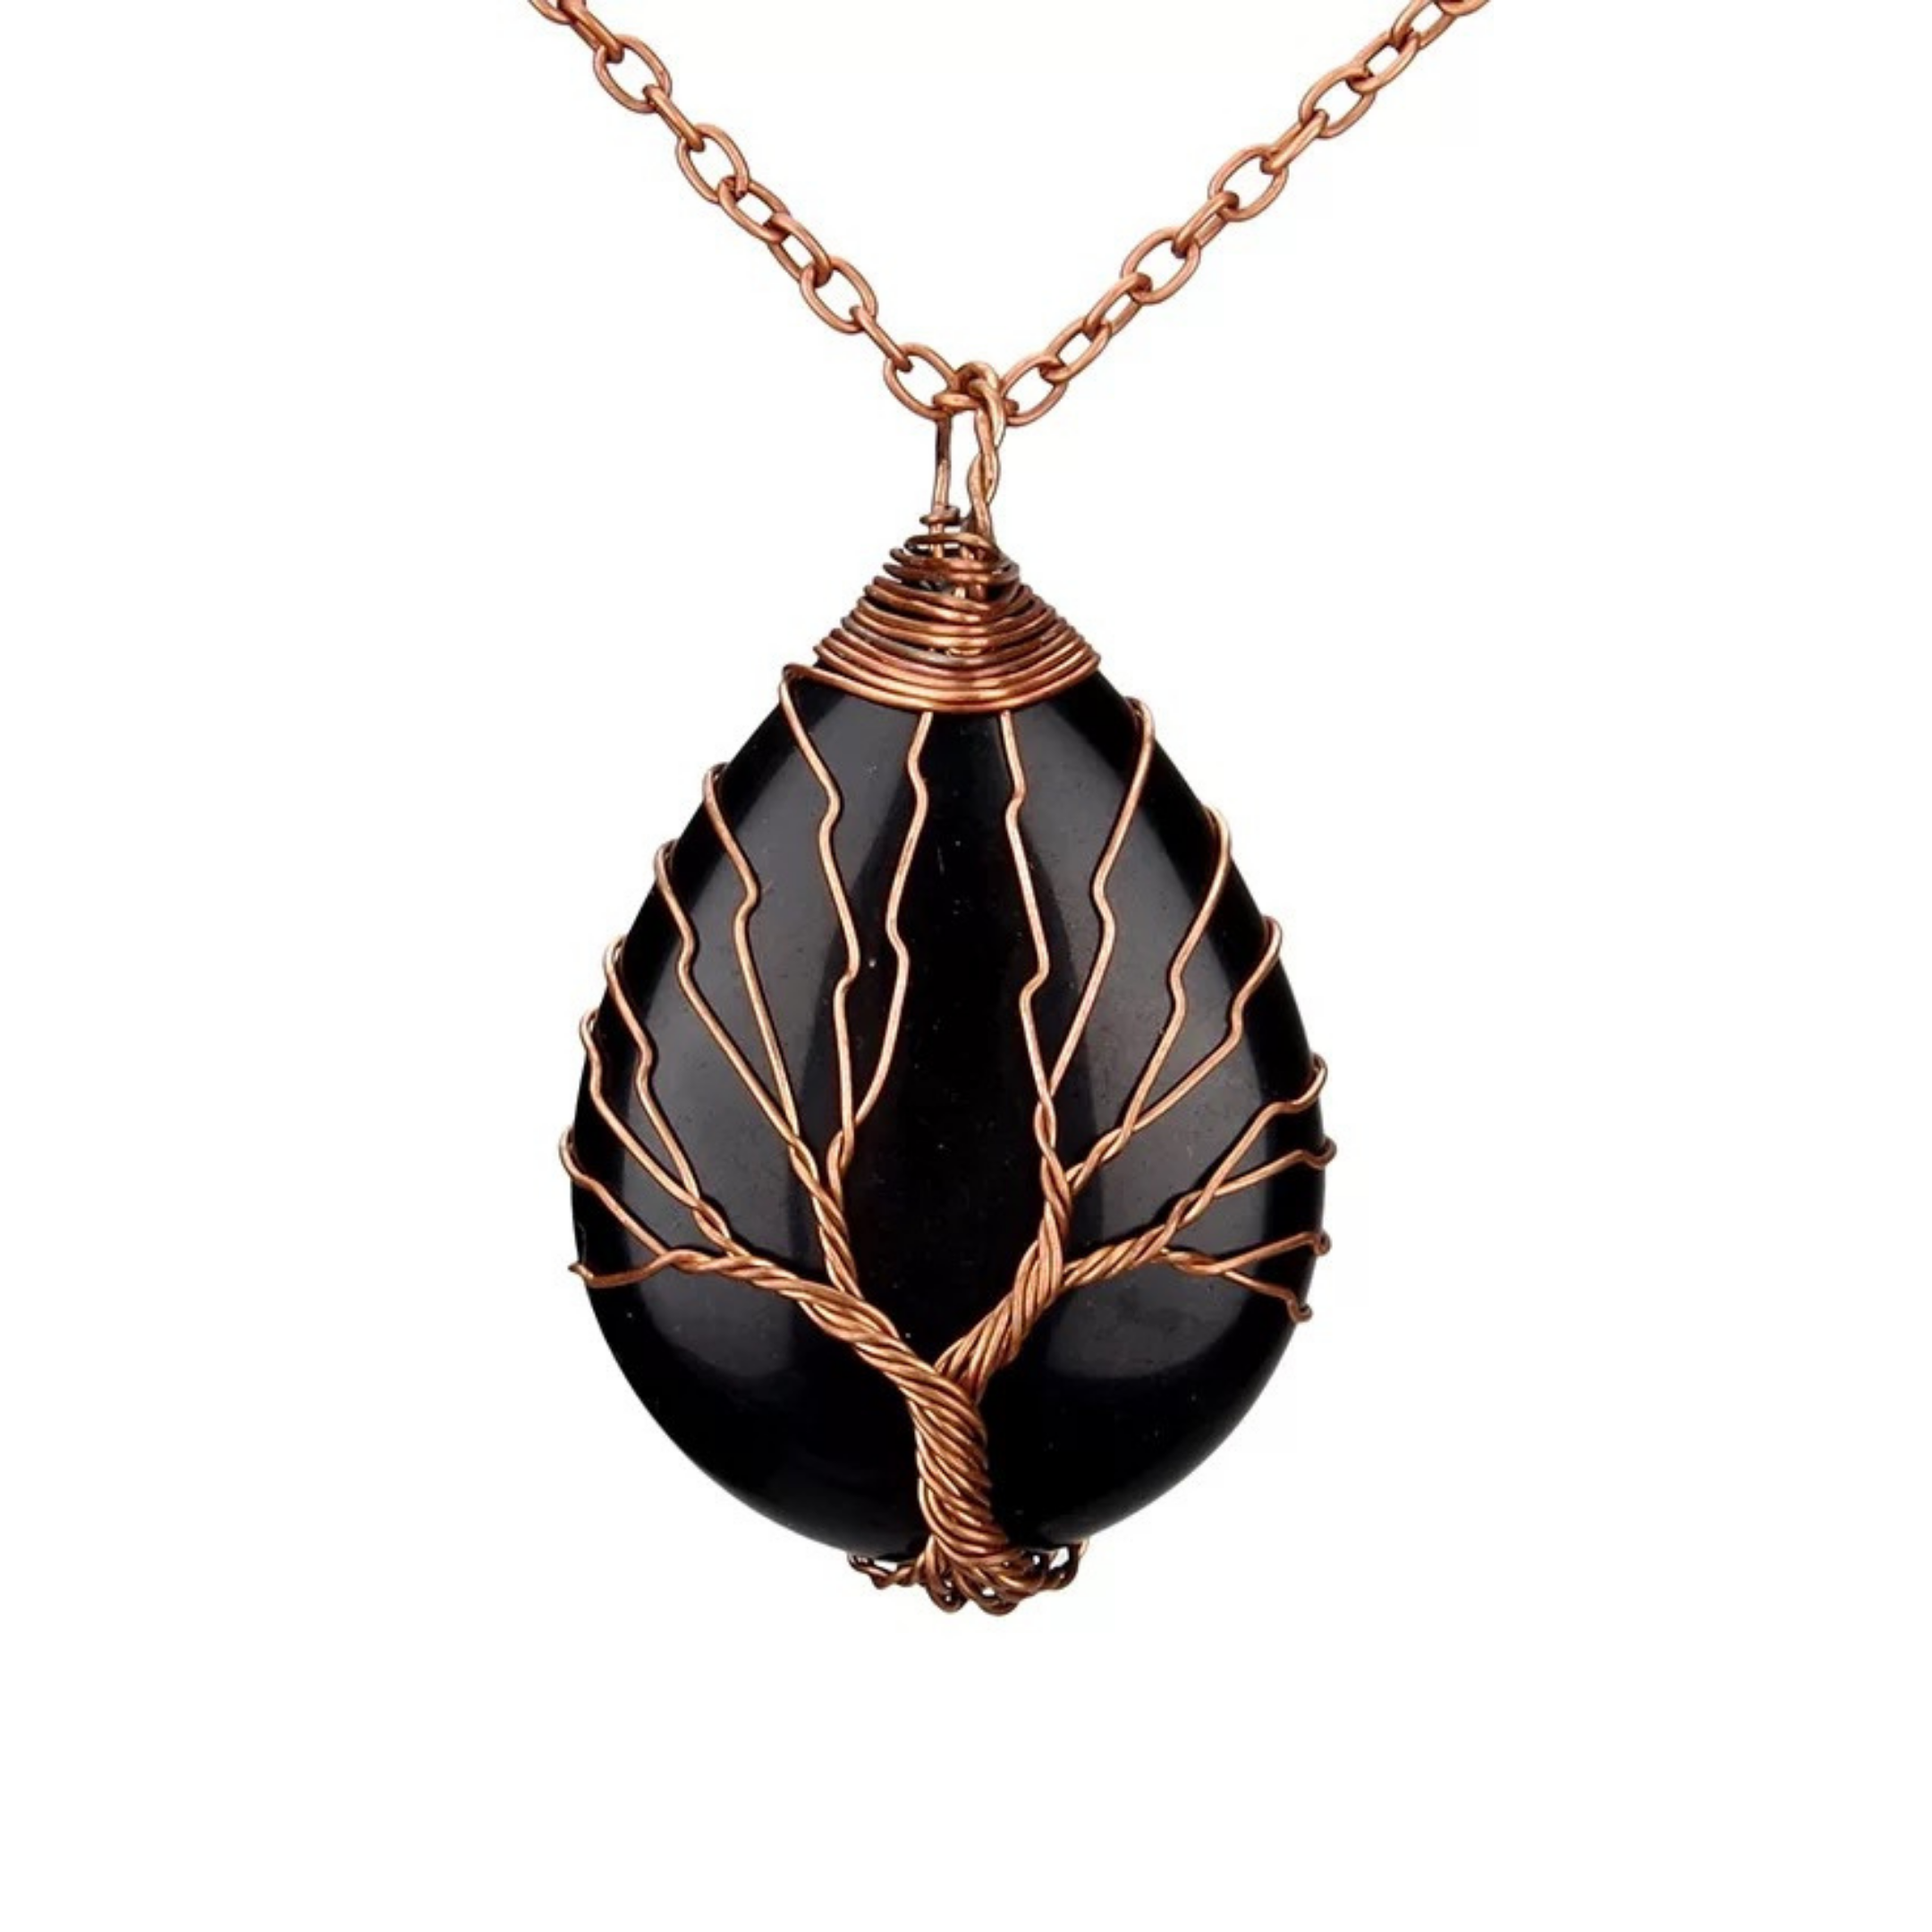 Tree of life necklace | Black Obsidian wire wrapped